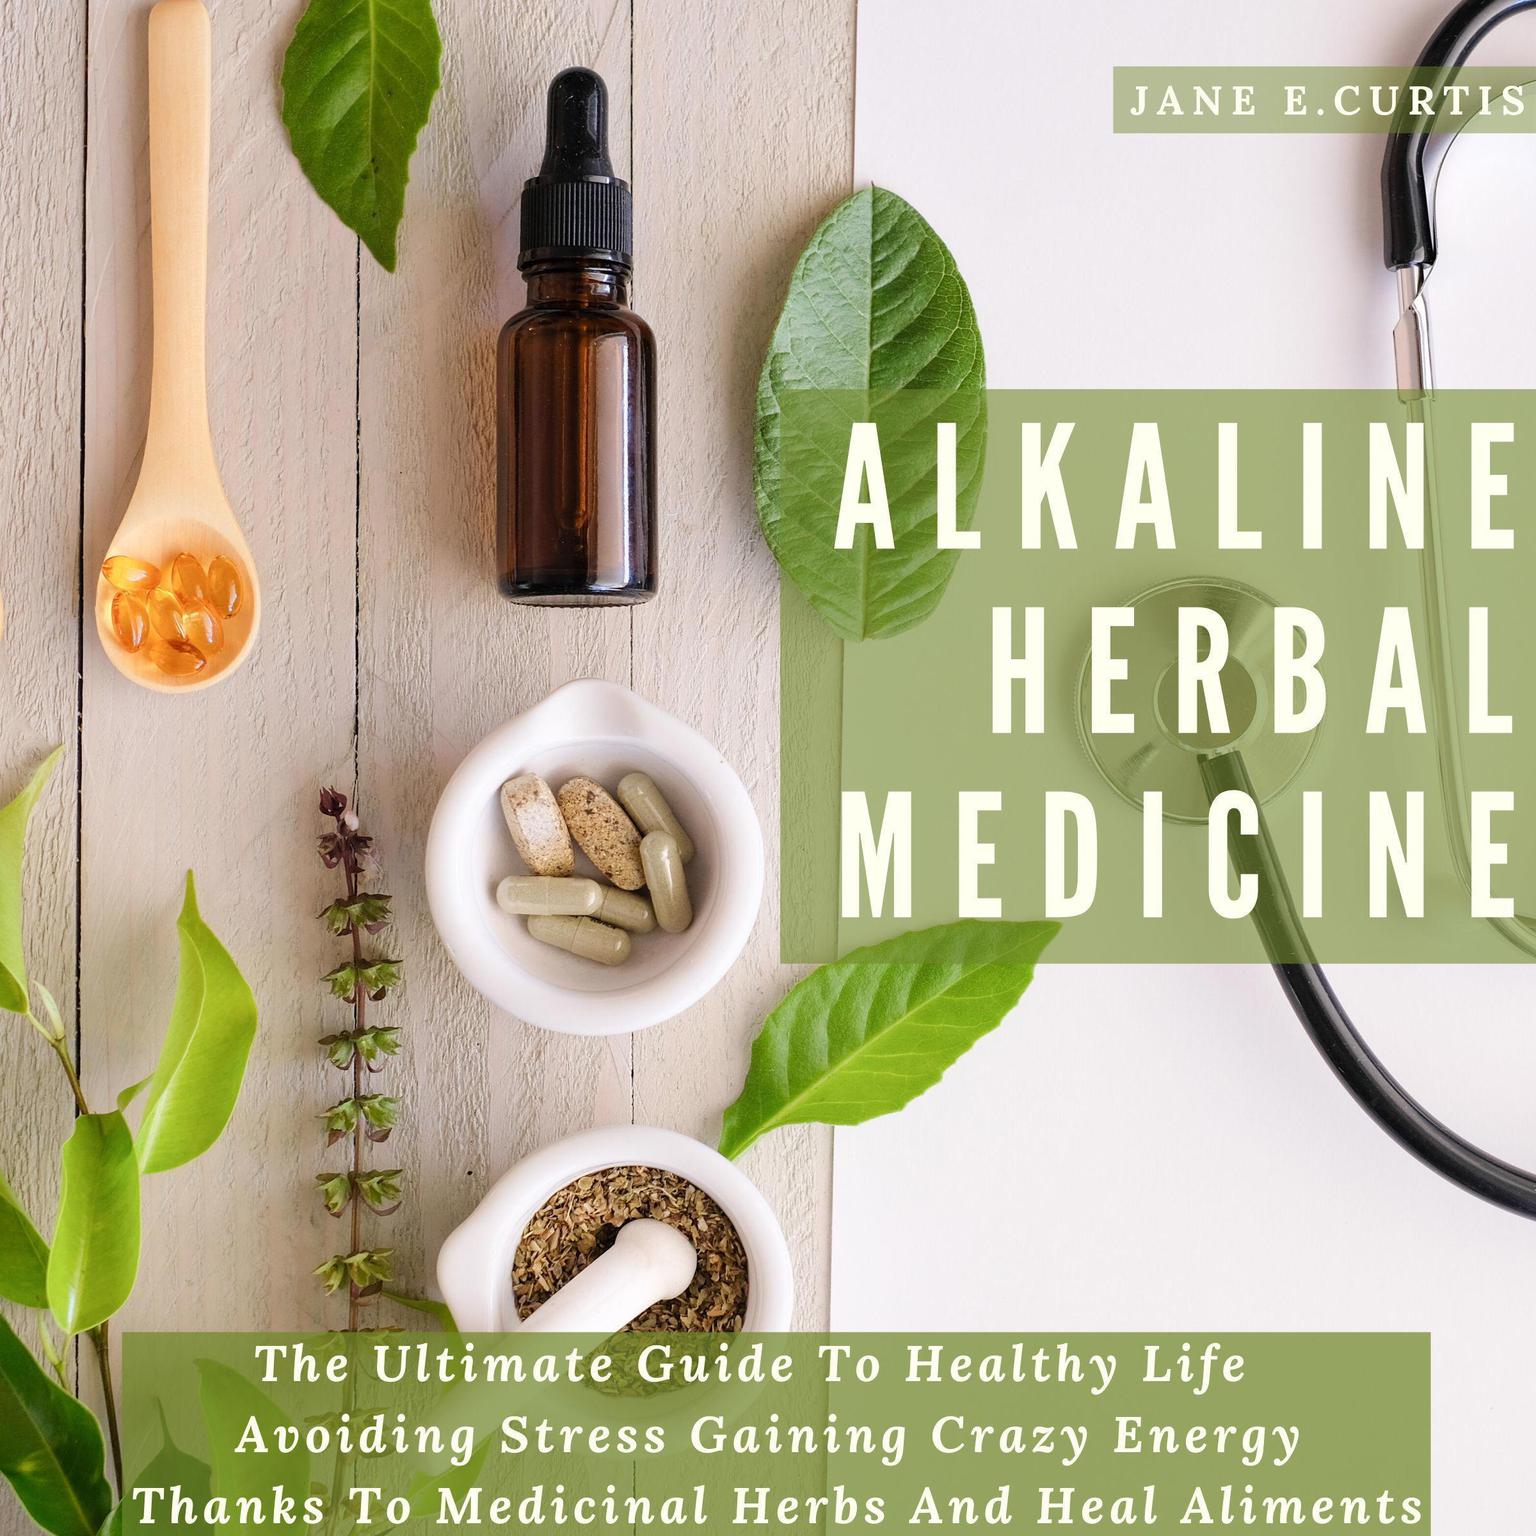 Alkaline Herbal Medicine The Ultimate Guide To Healthy Life , Avoiding Stress, Gaining Crazy Energy Thanks To Medicinal Herbs And Heal Aliments Audiobook, by Jane E. Curtis